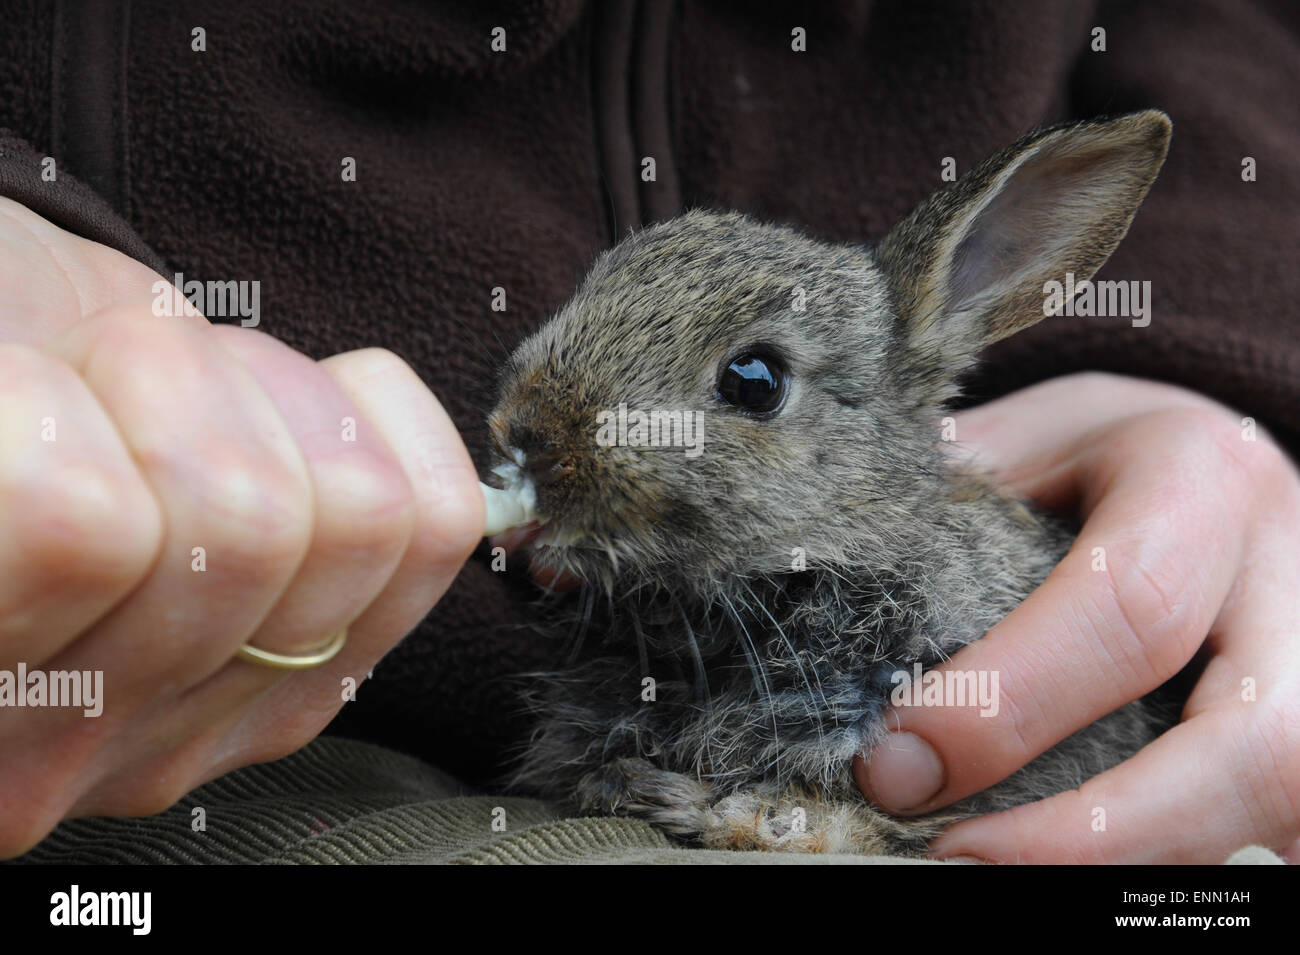 A baby European rabbit being hand-reared & fed with a syringe of milk. Stock Photo